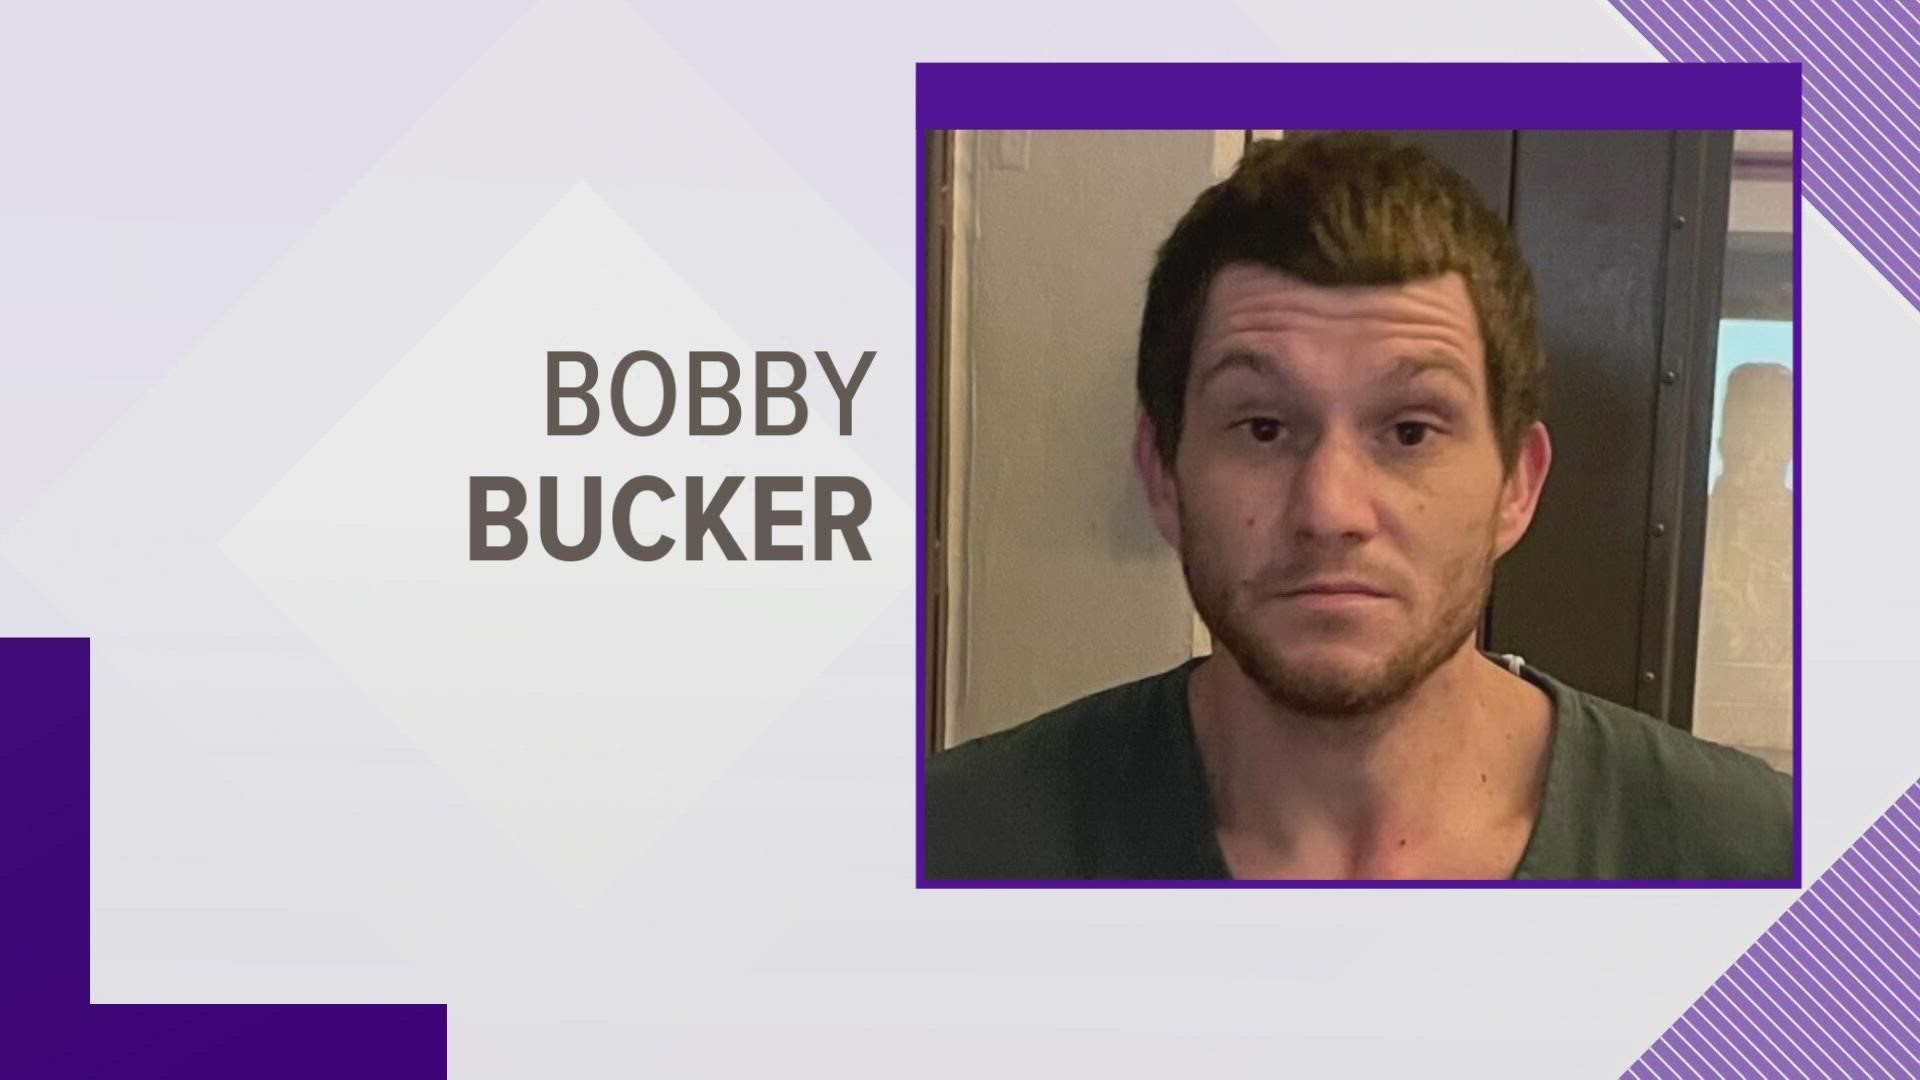 The TBI said a grand jury indicted Bobby Buckner for arson and three counts of reckless endangerment, accusing him of starting a house fire in November 2020.